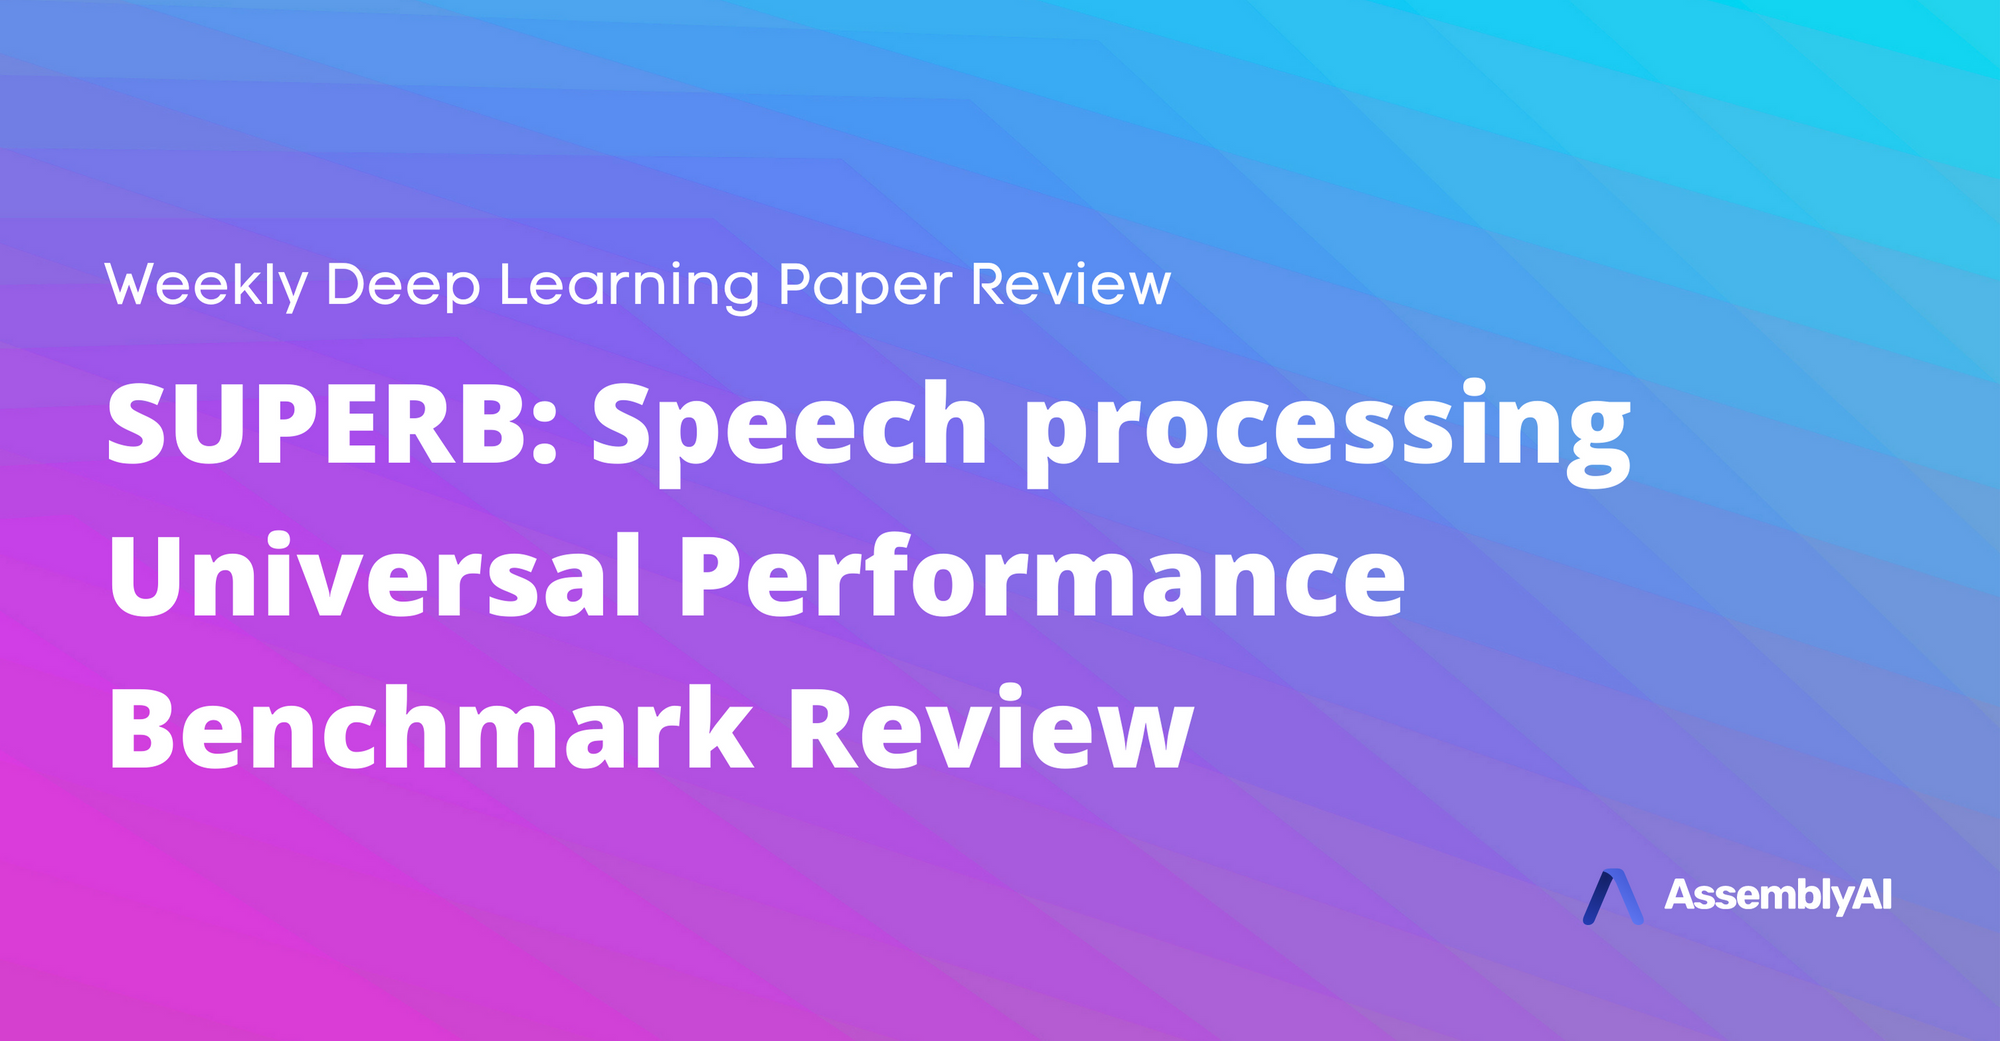 Review - Speech processing Universal Performance Benchmark Review